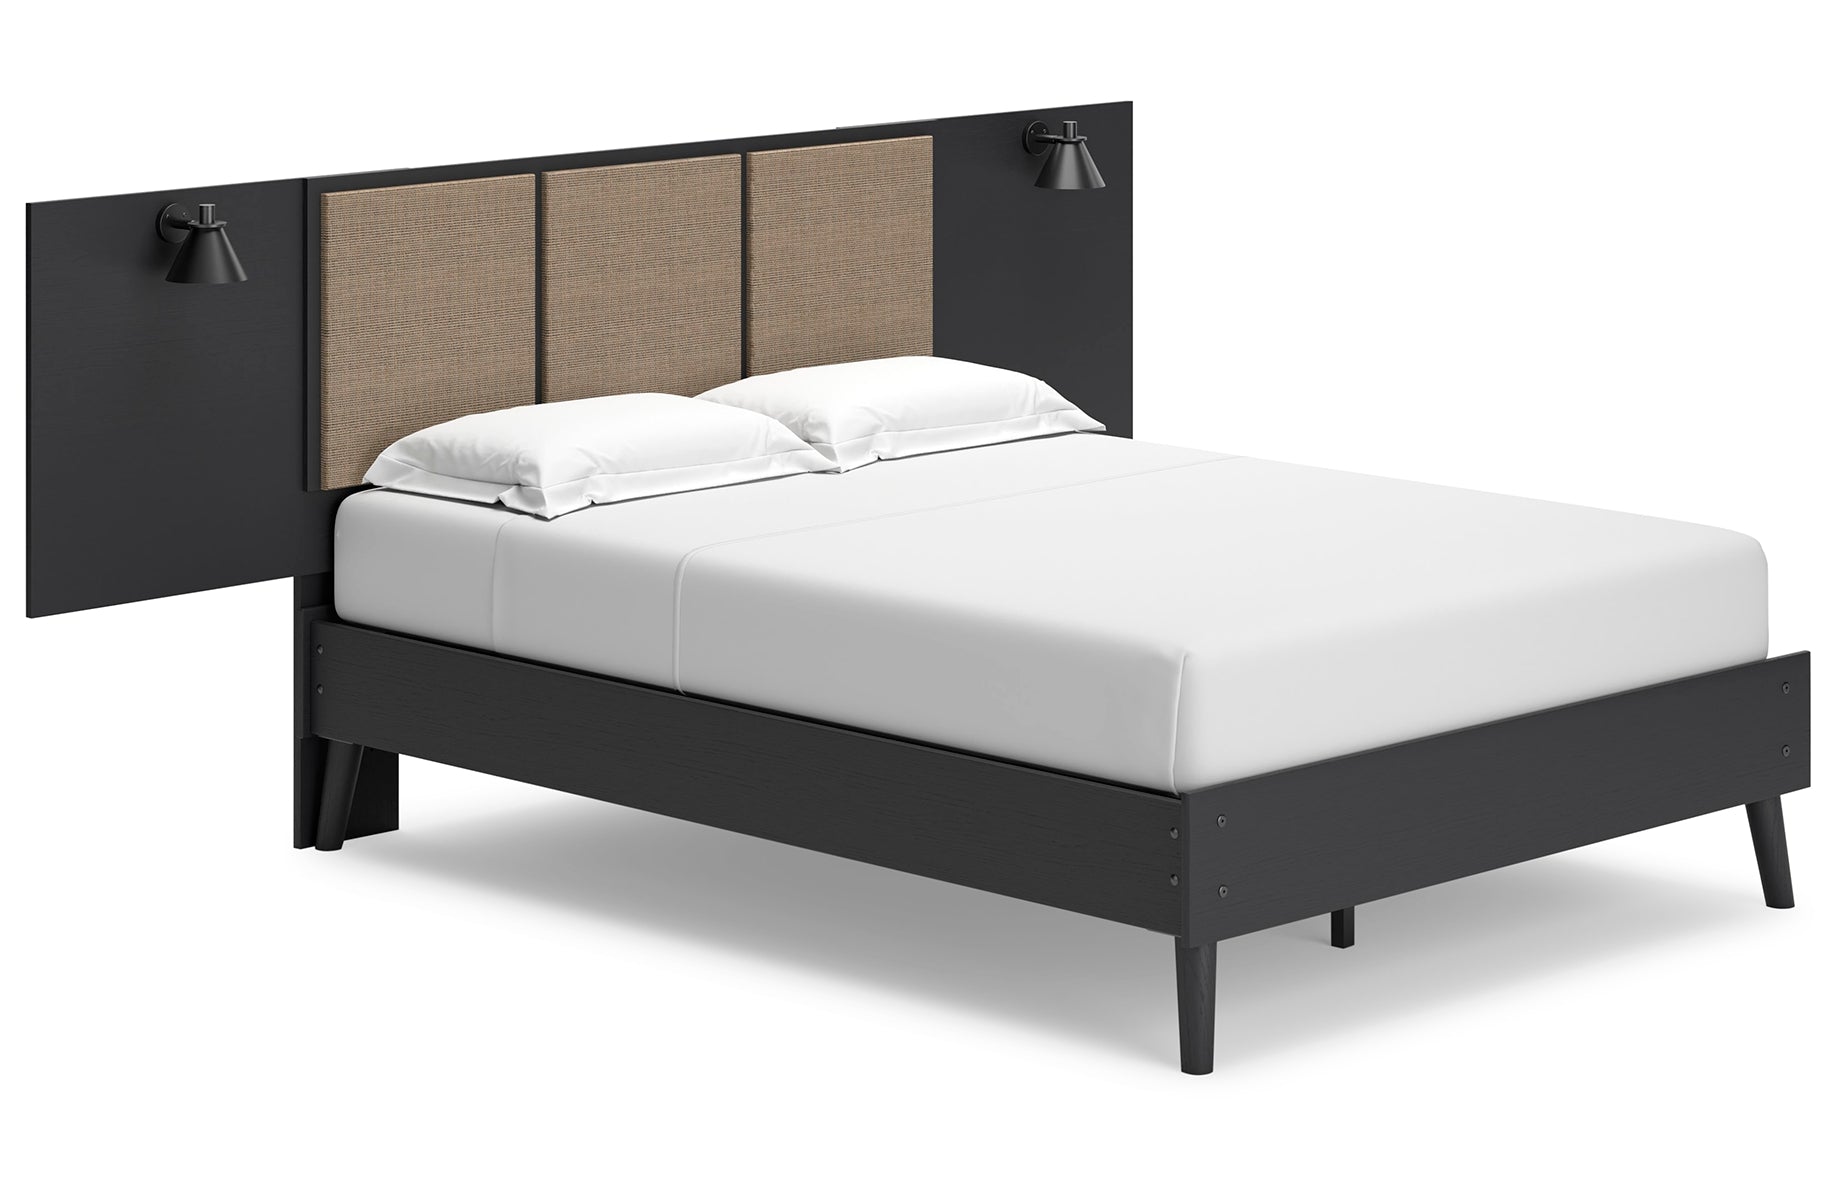 Charlang Full Panel Platform Bed with Dresser and Chest